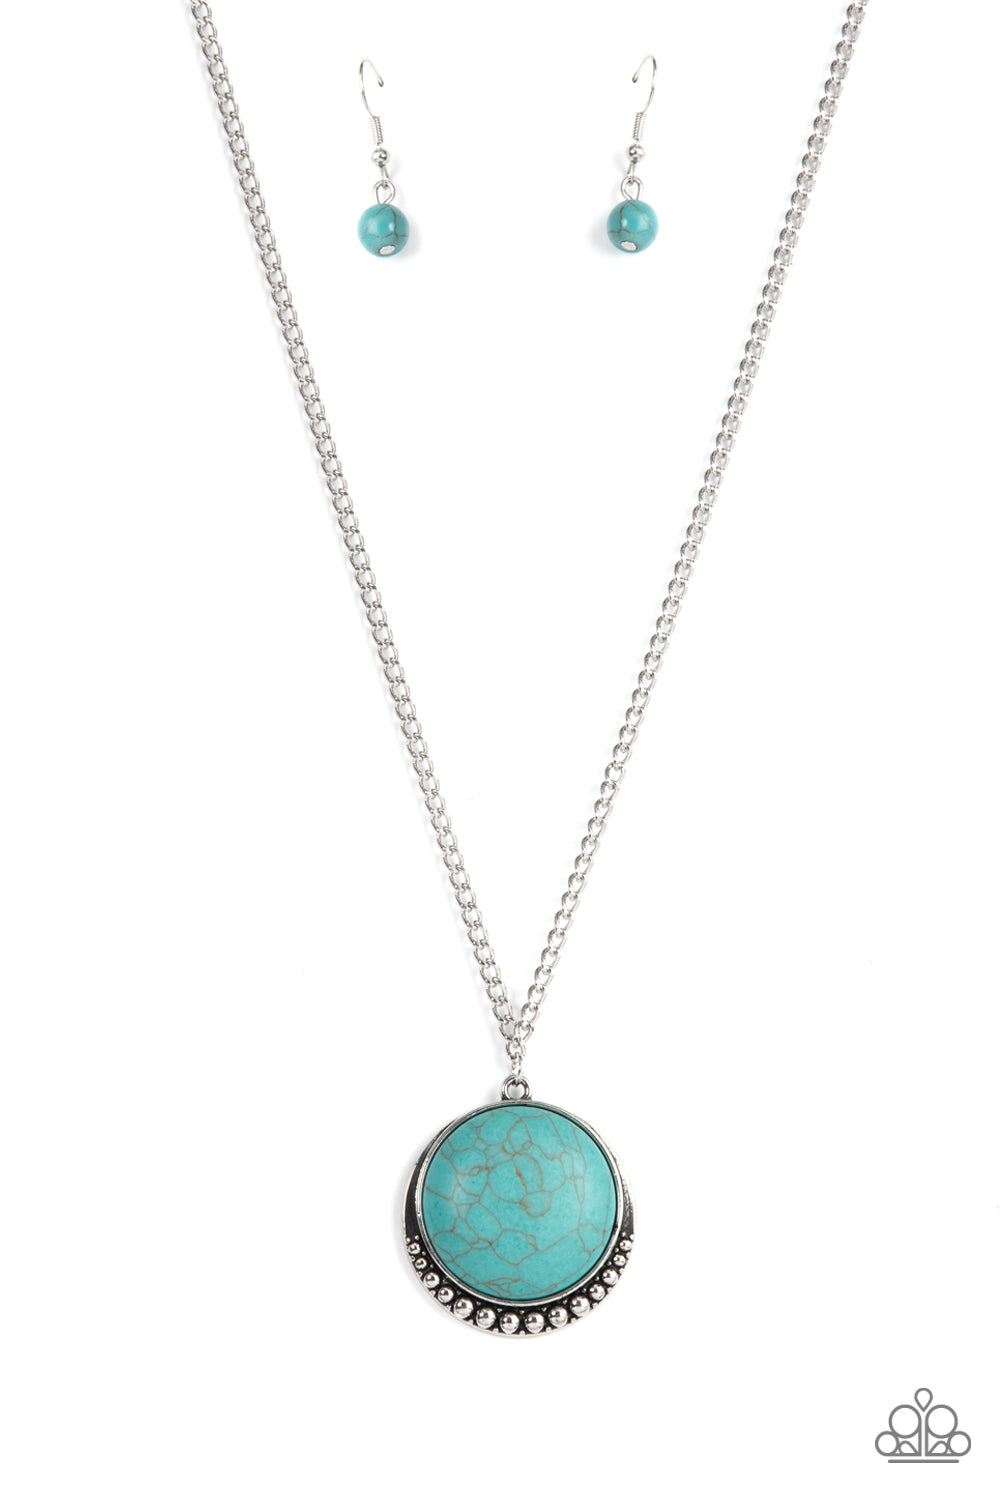 Mojave Moon Paparazzi Accessories Necklace with Earrings Blue